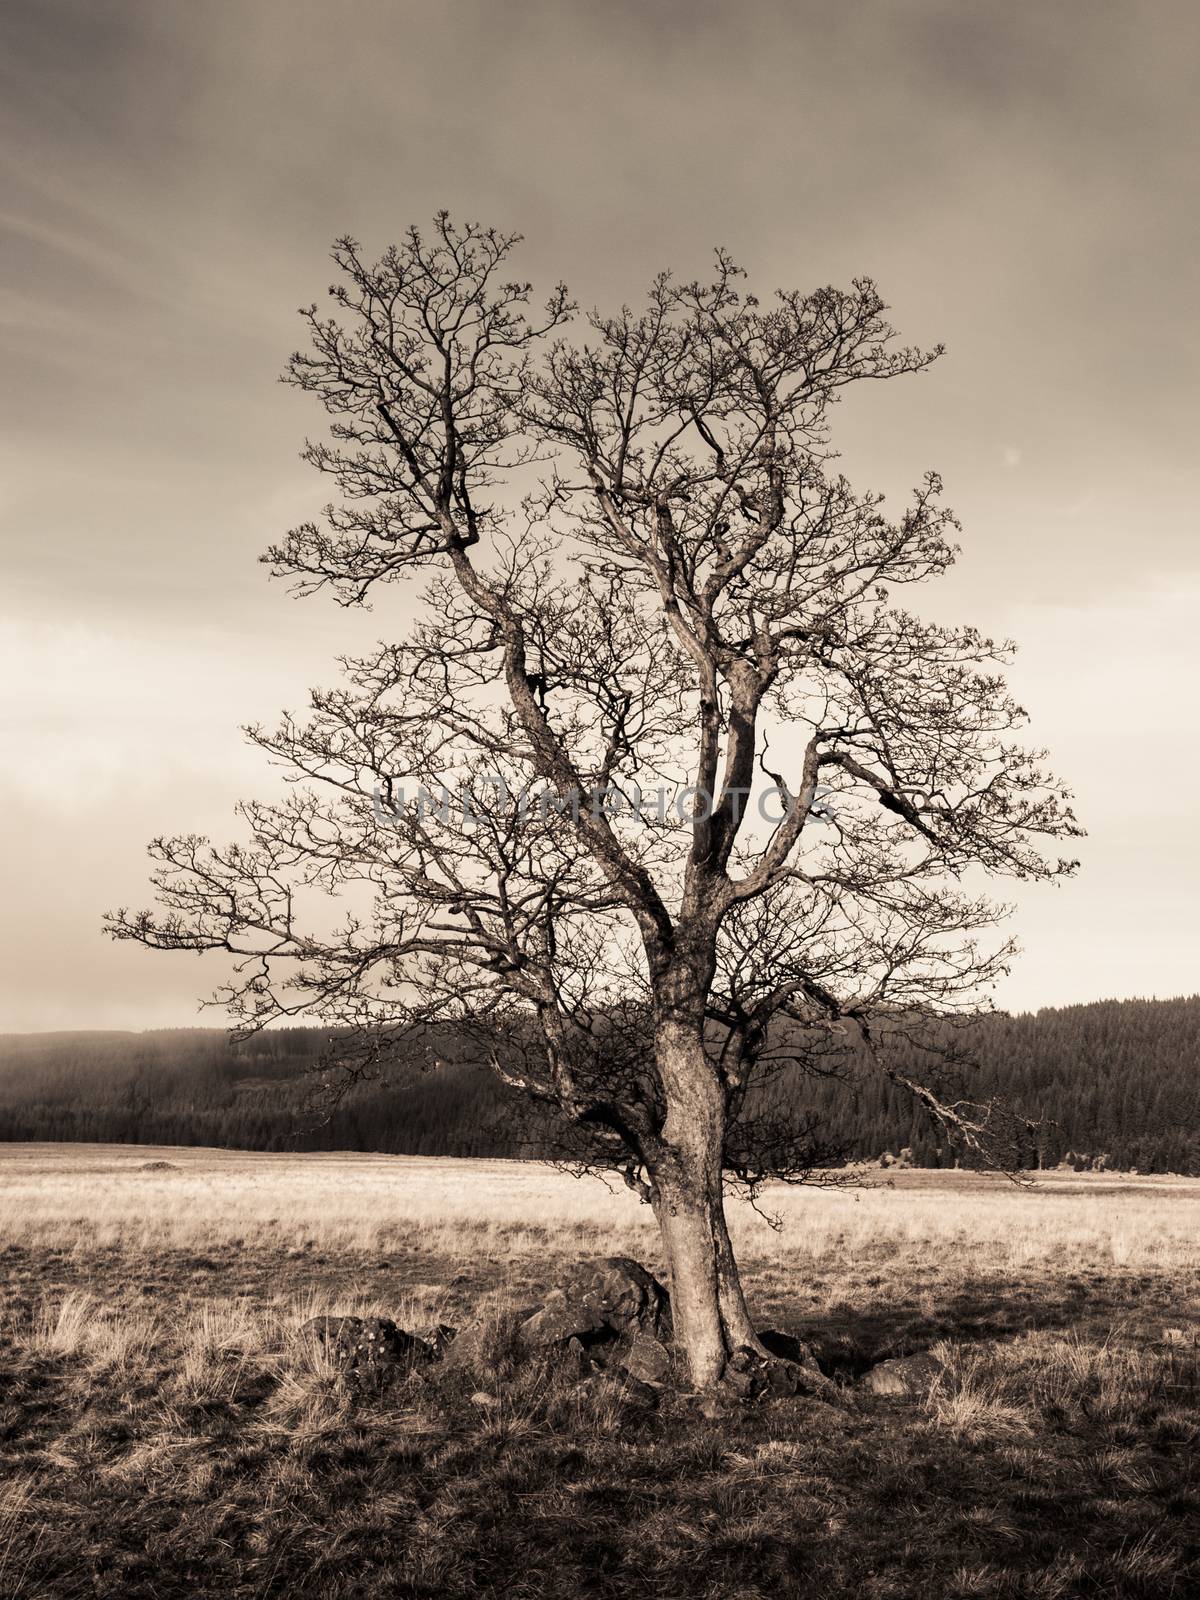 Lonely tree in autumn landscape. Dramatic amosphere.